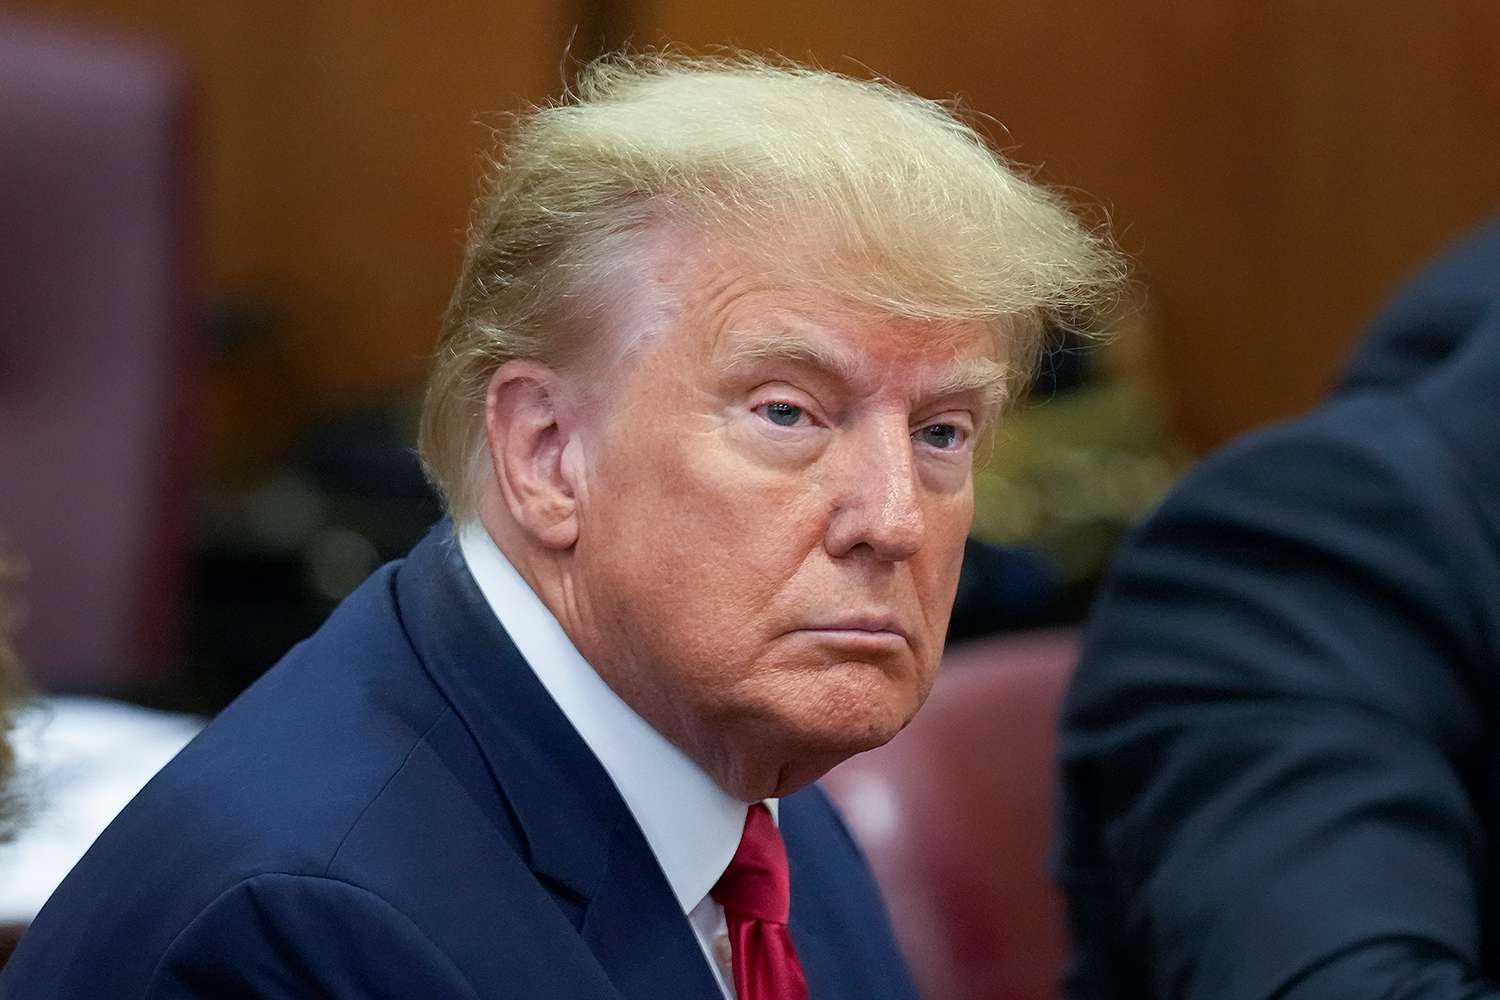 Former U.S. President Donald Trump sits at the defense table with his defense team in a Manhattan court on April 4, 2023 in New York City.